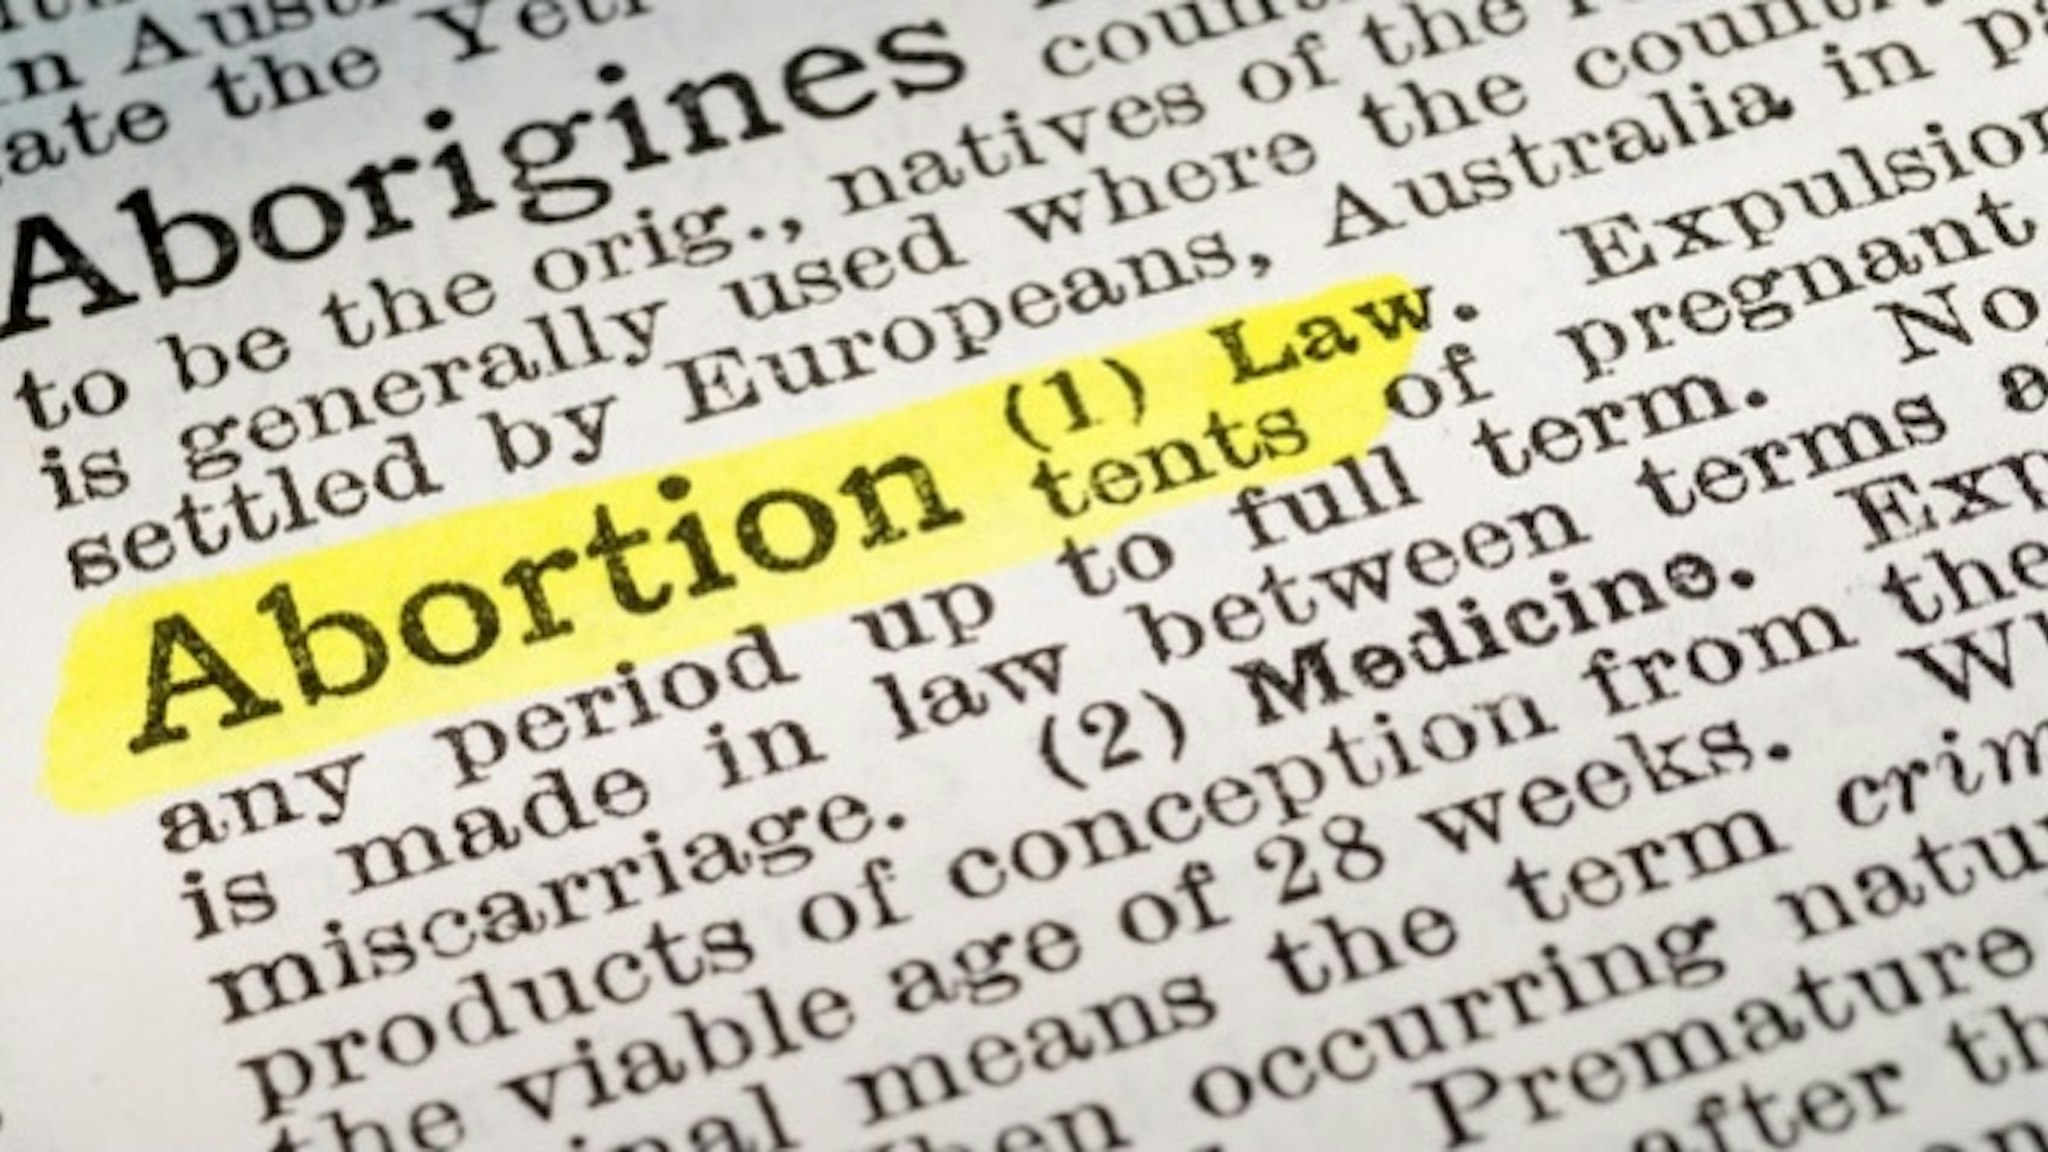 Abortion - dictionary definition highlighted - stock photo The term Abortion - dictionary definition highlighted with yellow marker stockcam via Getty Images